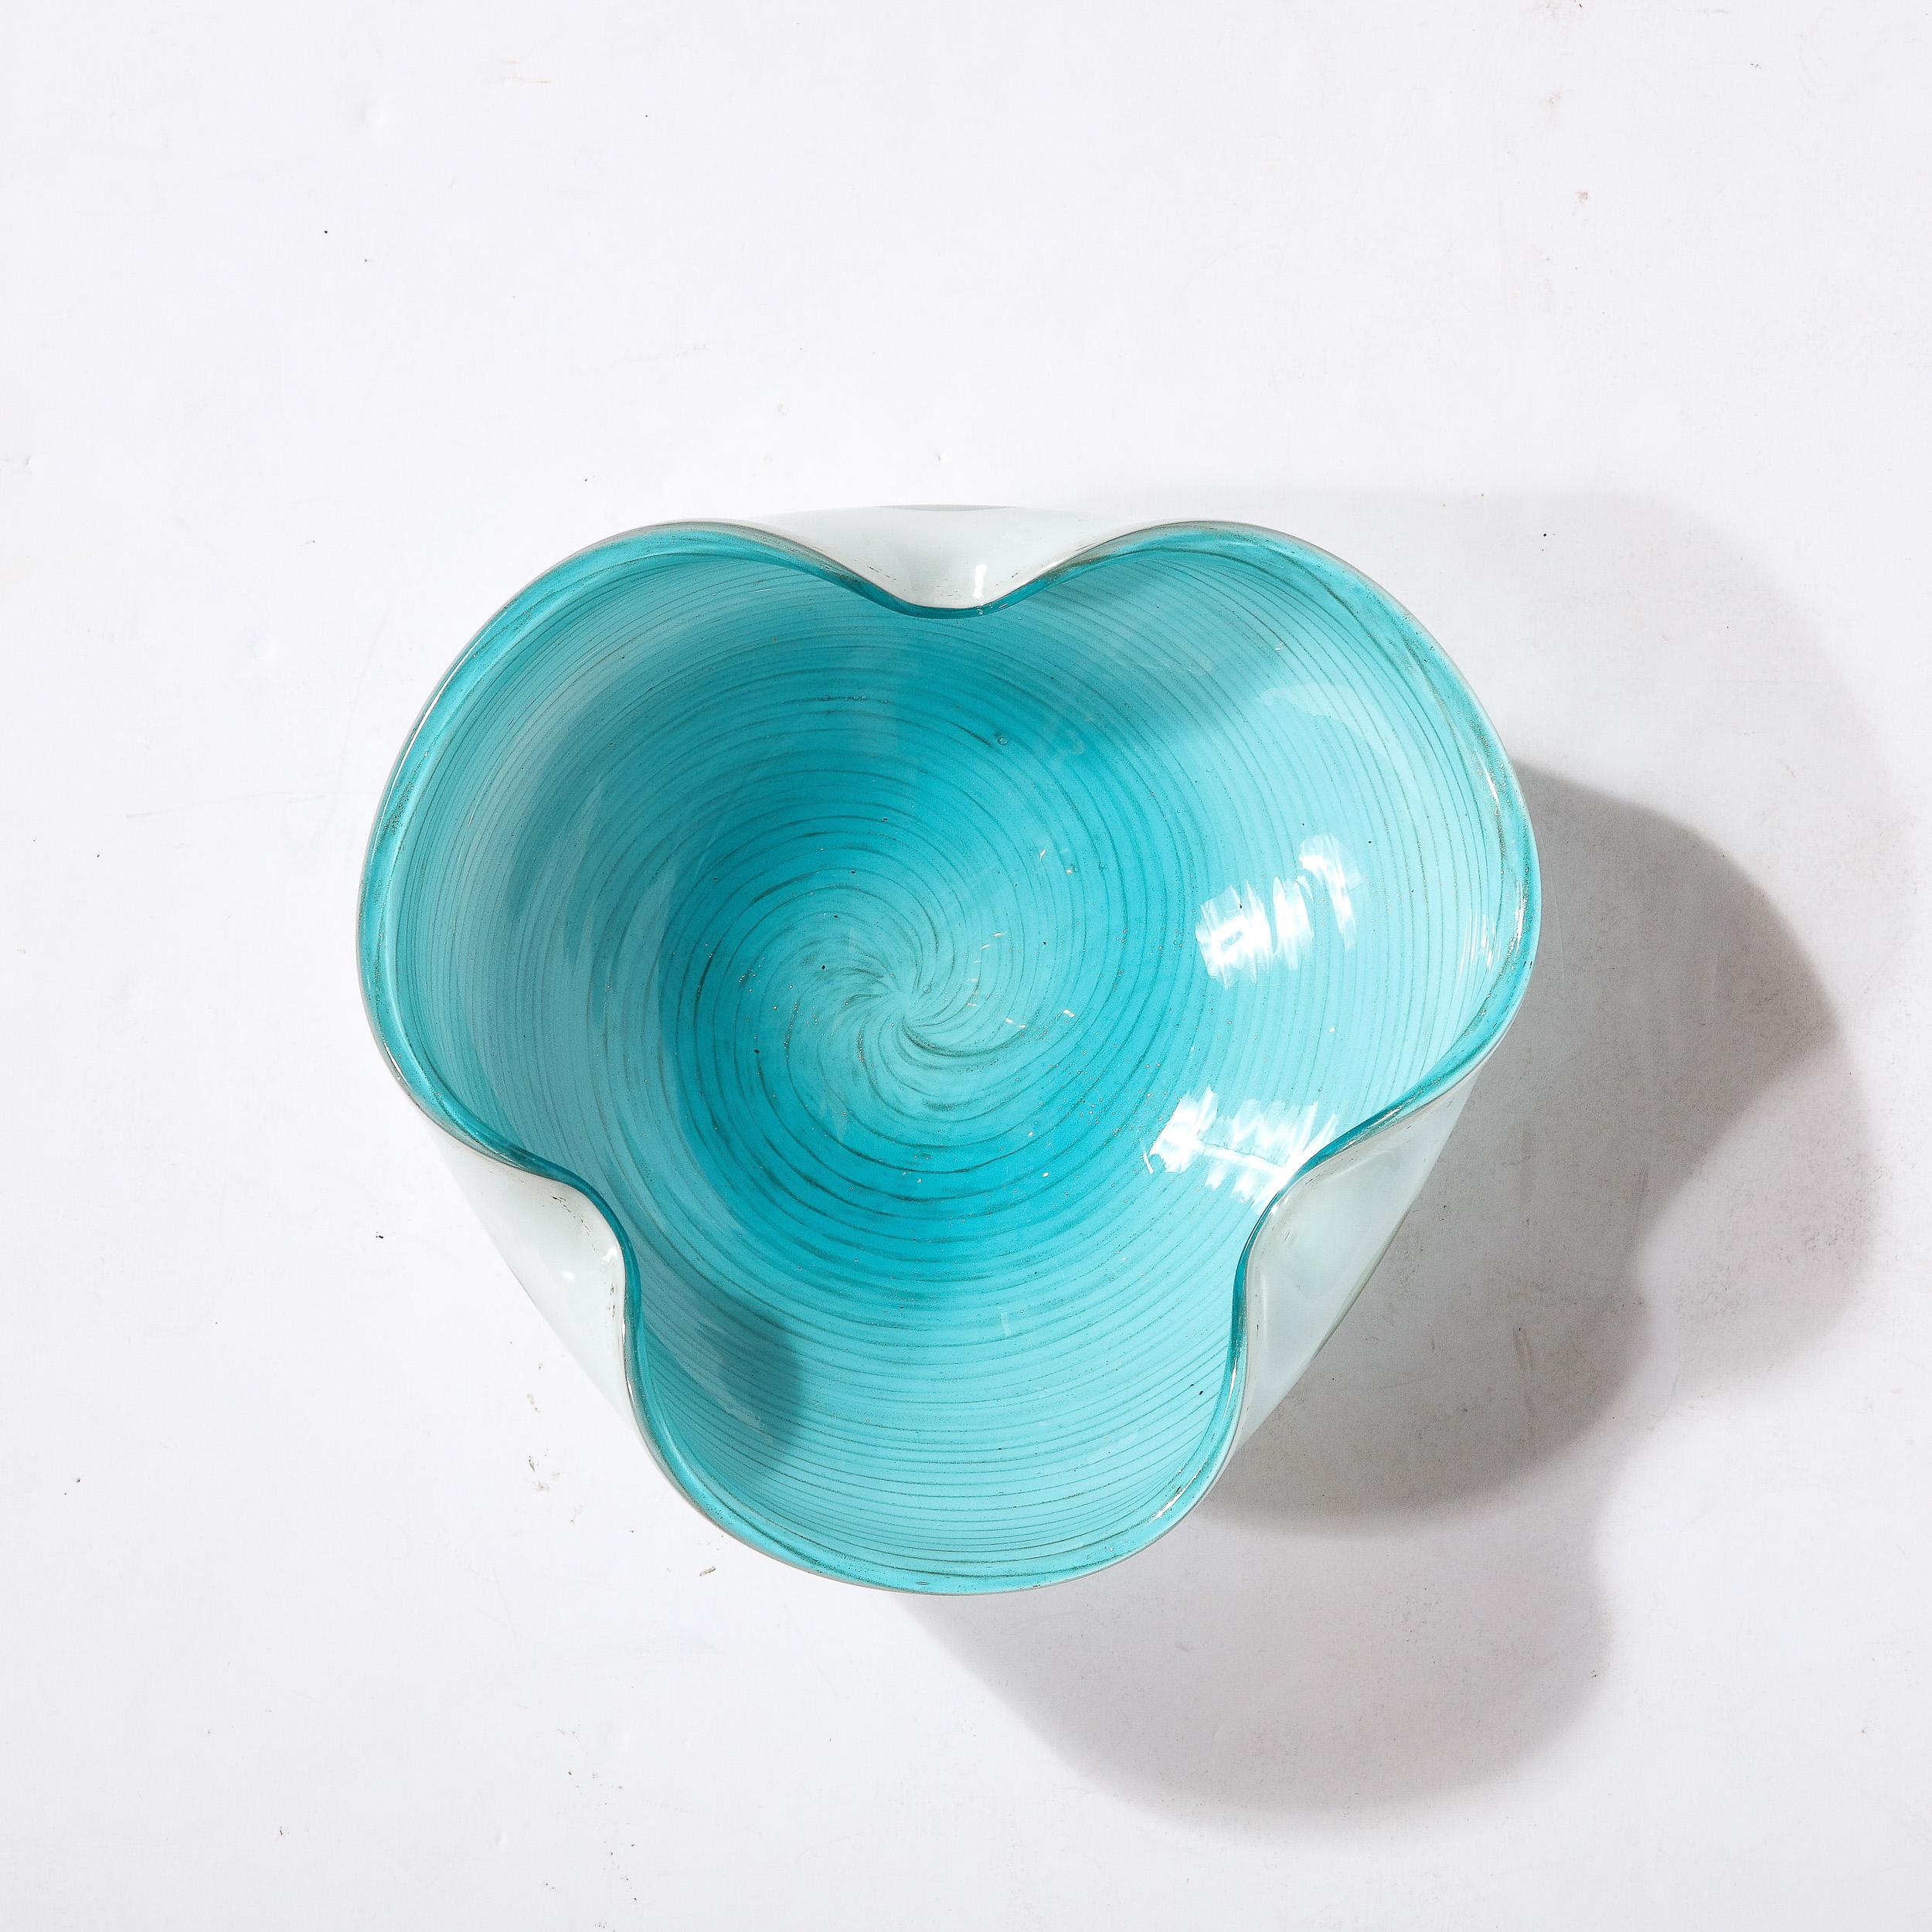 This Mid-Century Modernist Hand-Blown Murano Glass Dish originates from Italy, Circa 1950. A beautiful example of the Murano Art Glass tradition, this piece is elegantly made and utilizes the material complexity inherent in blown glass with its